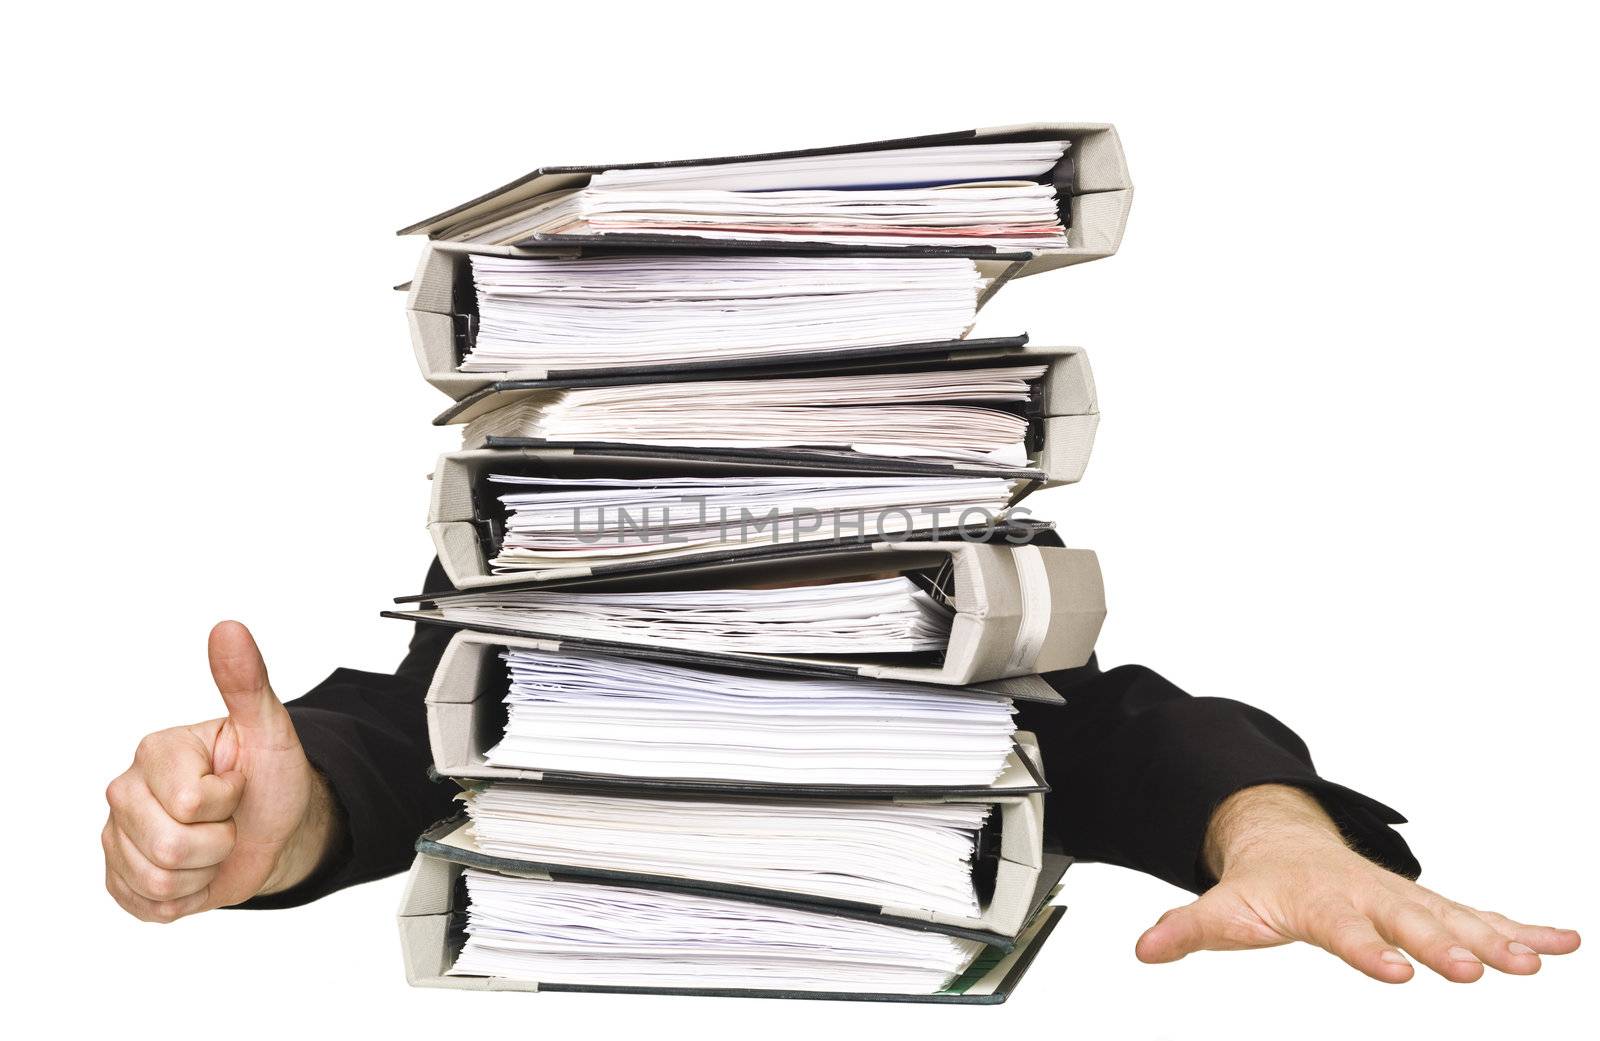 Human doing thumbs up behind a stack of Ring Binders